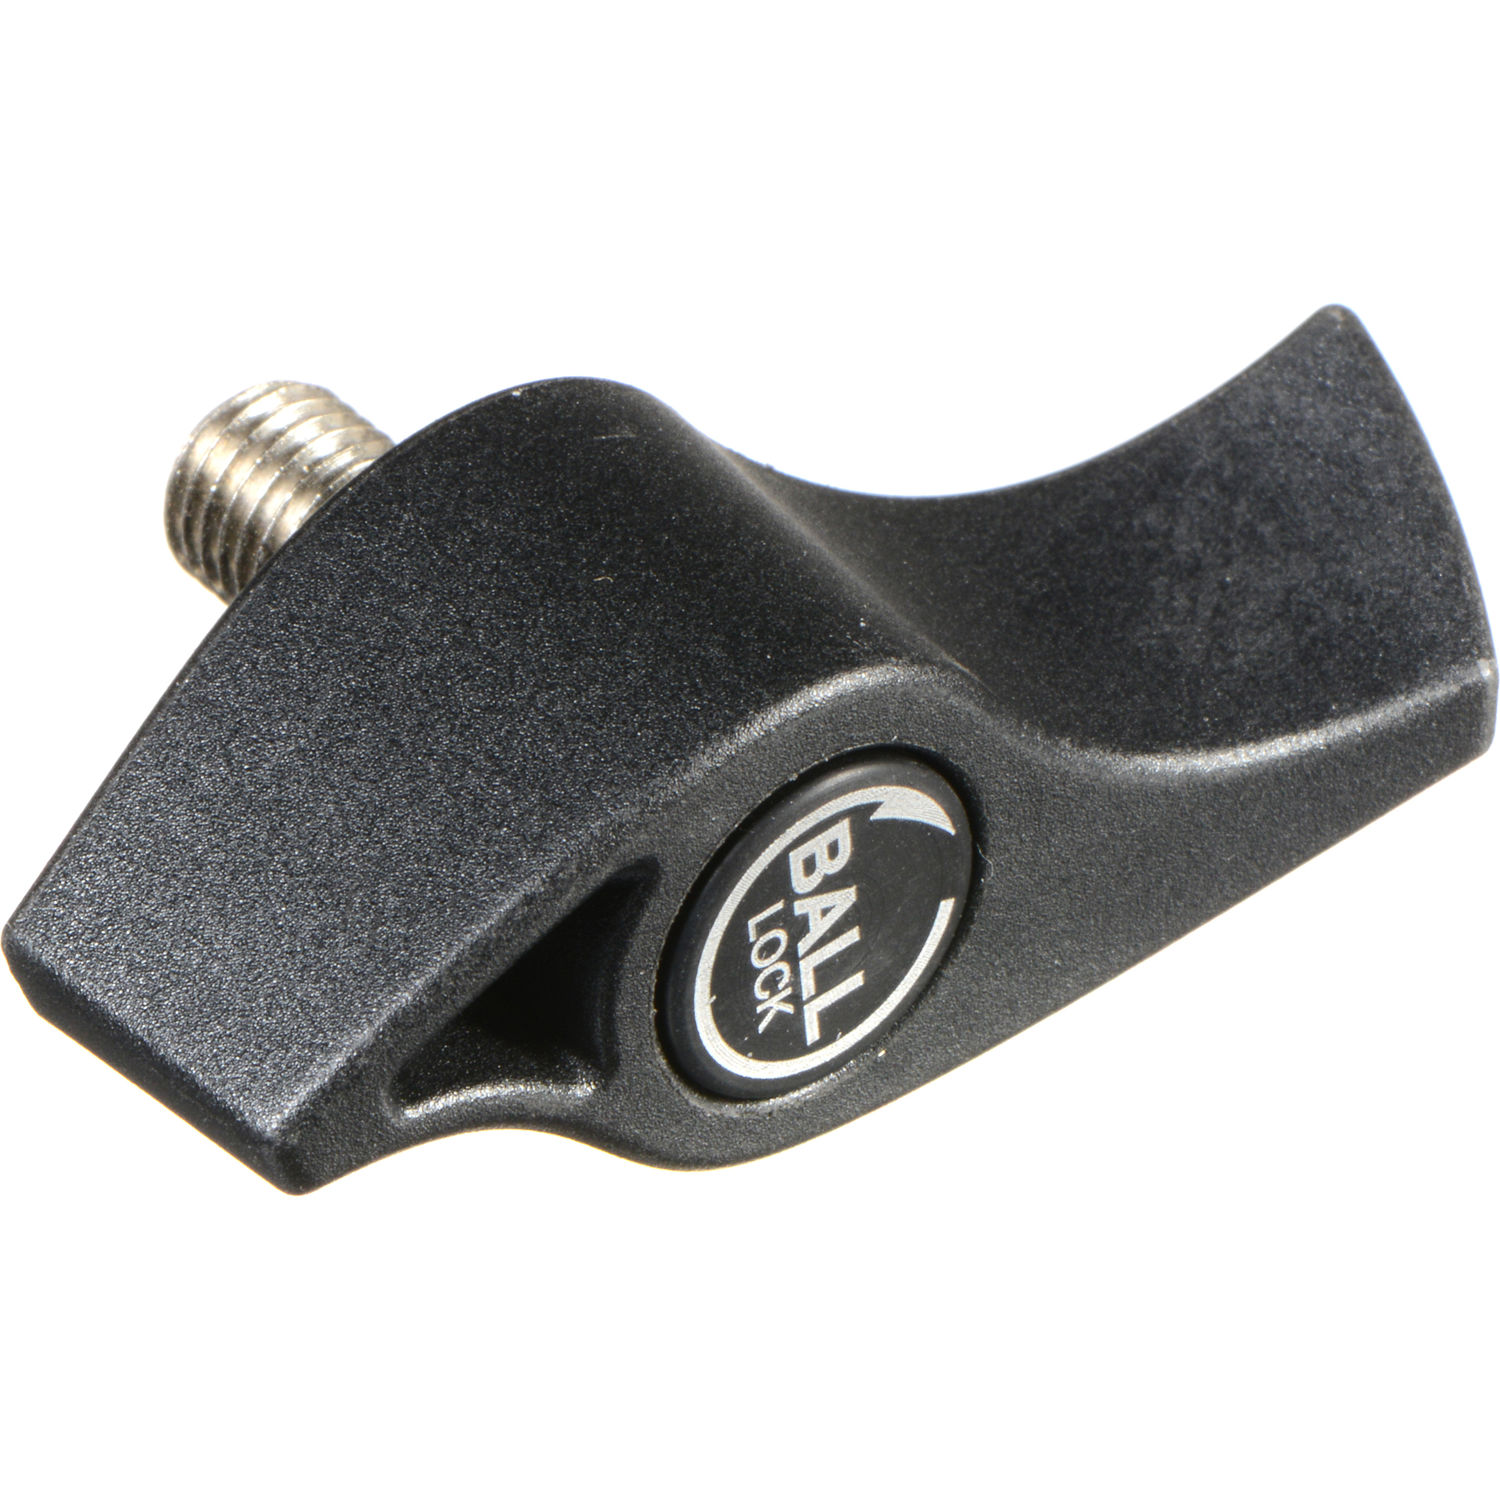 Manfrotto R4190.18 Lock Knob for Select Manfrotto Ball Heads